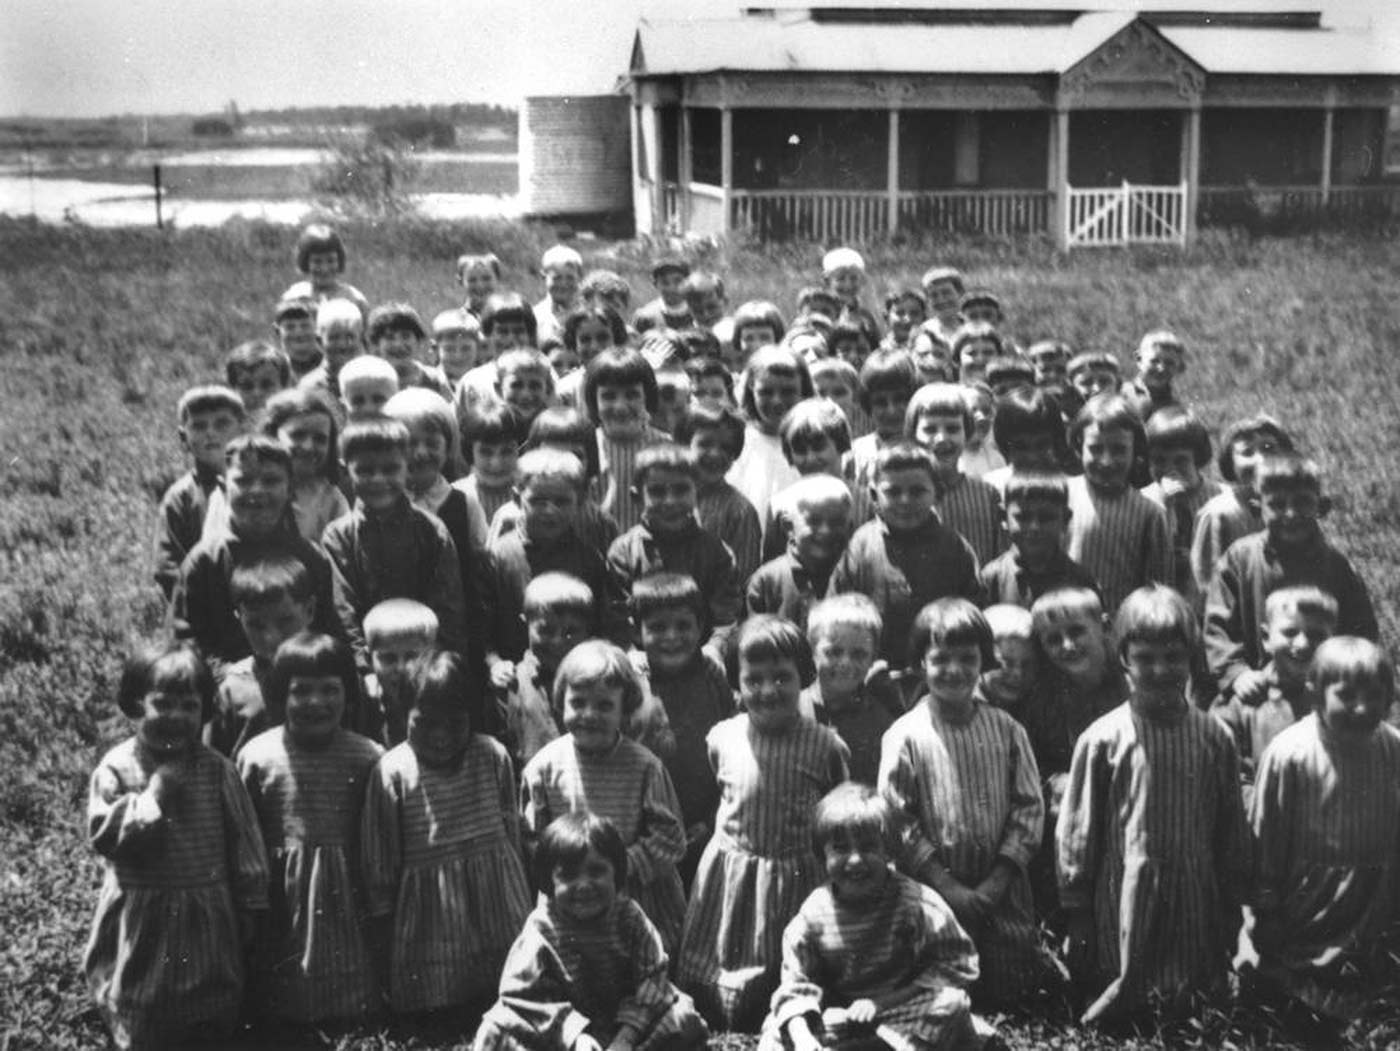 Black and white photo showing a group of about 50 children, sitting and kneeling on grass, with a wooden homestead in the background. The young girls wear striped dresses and the boys wear dark tops. Most of the children are smiling. - click to view larger image